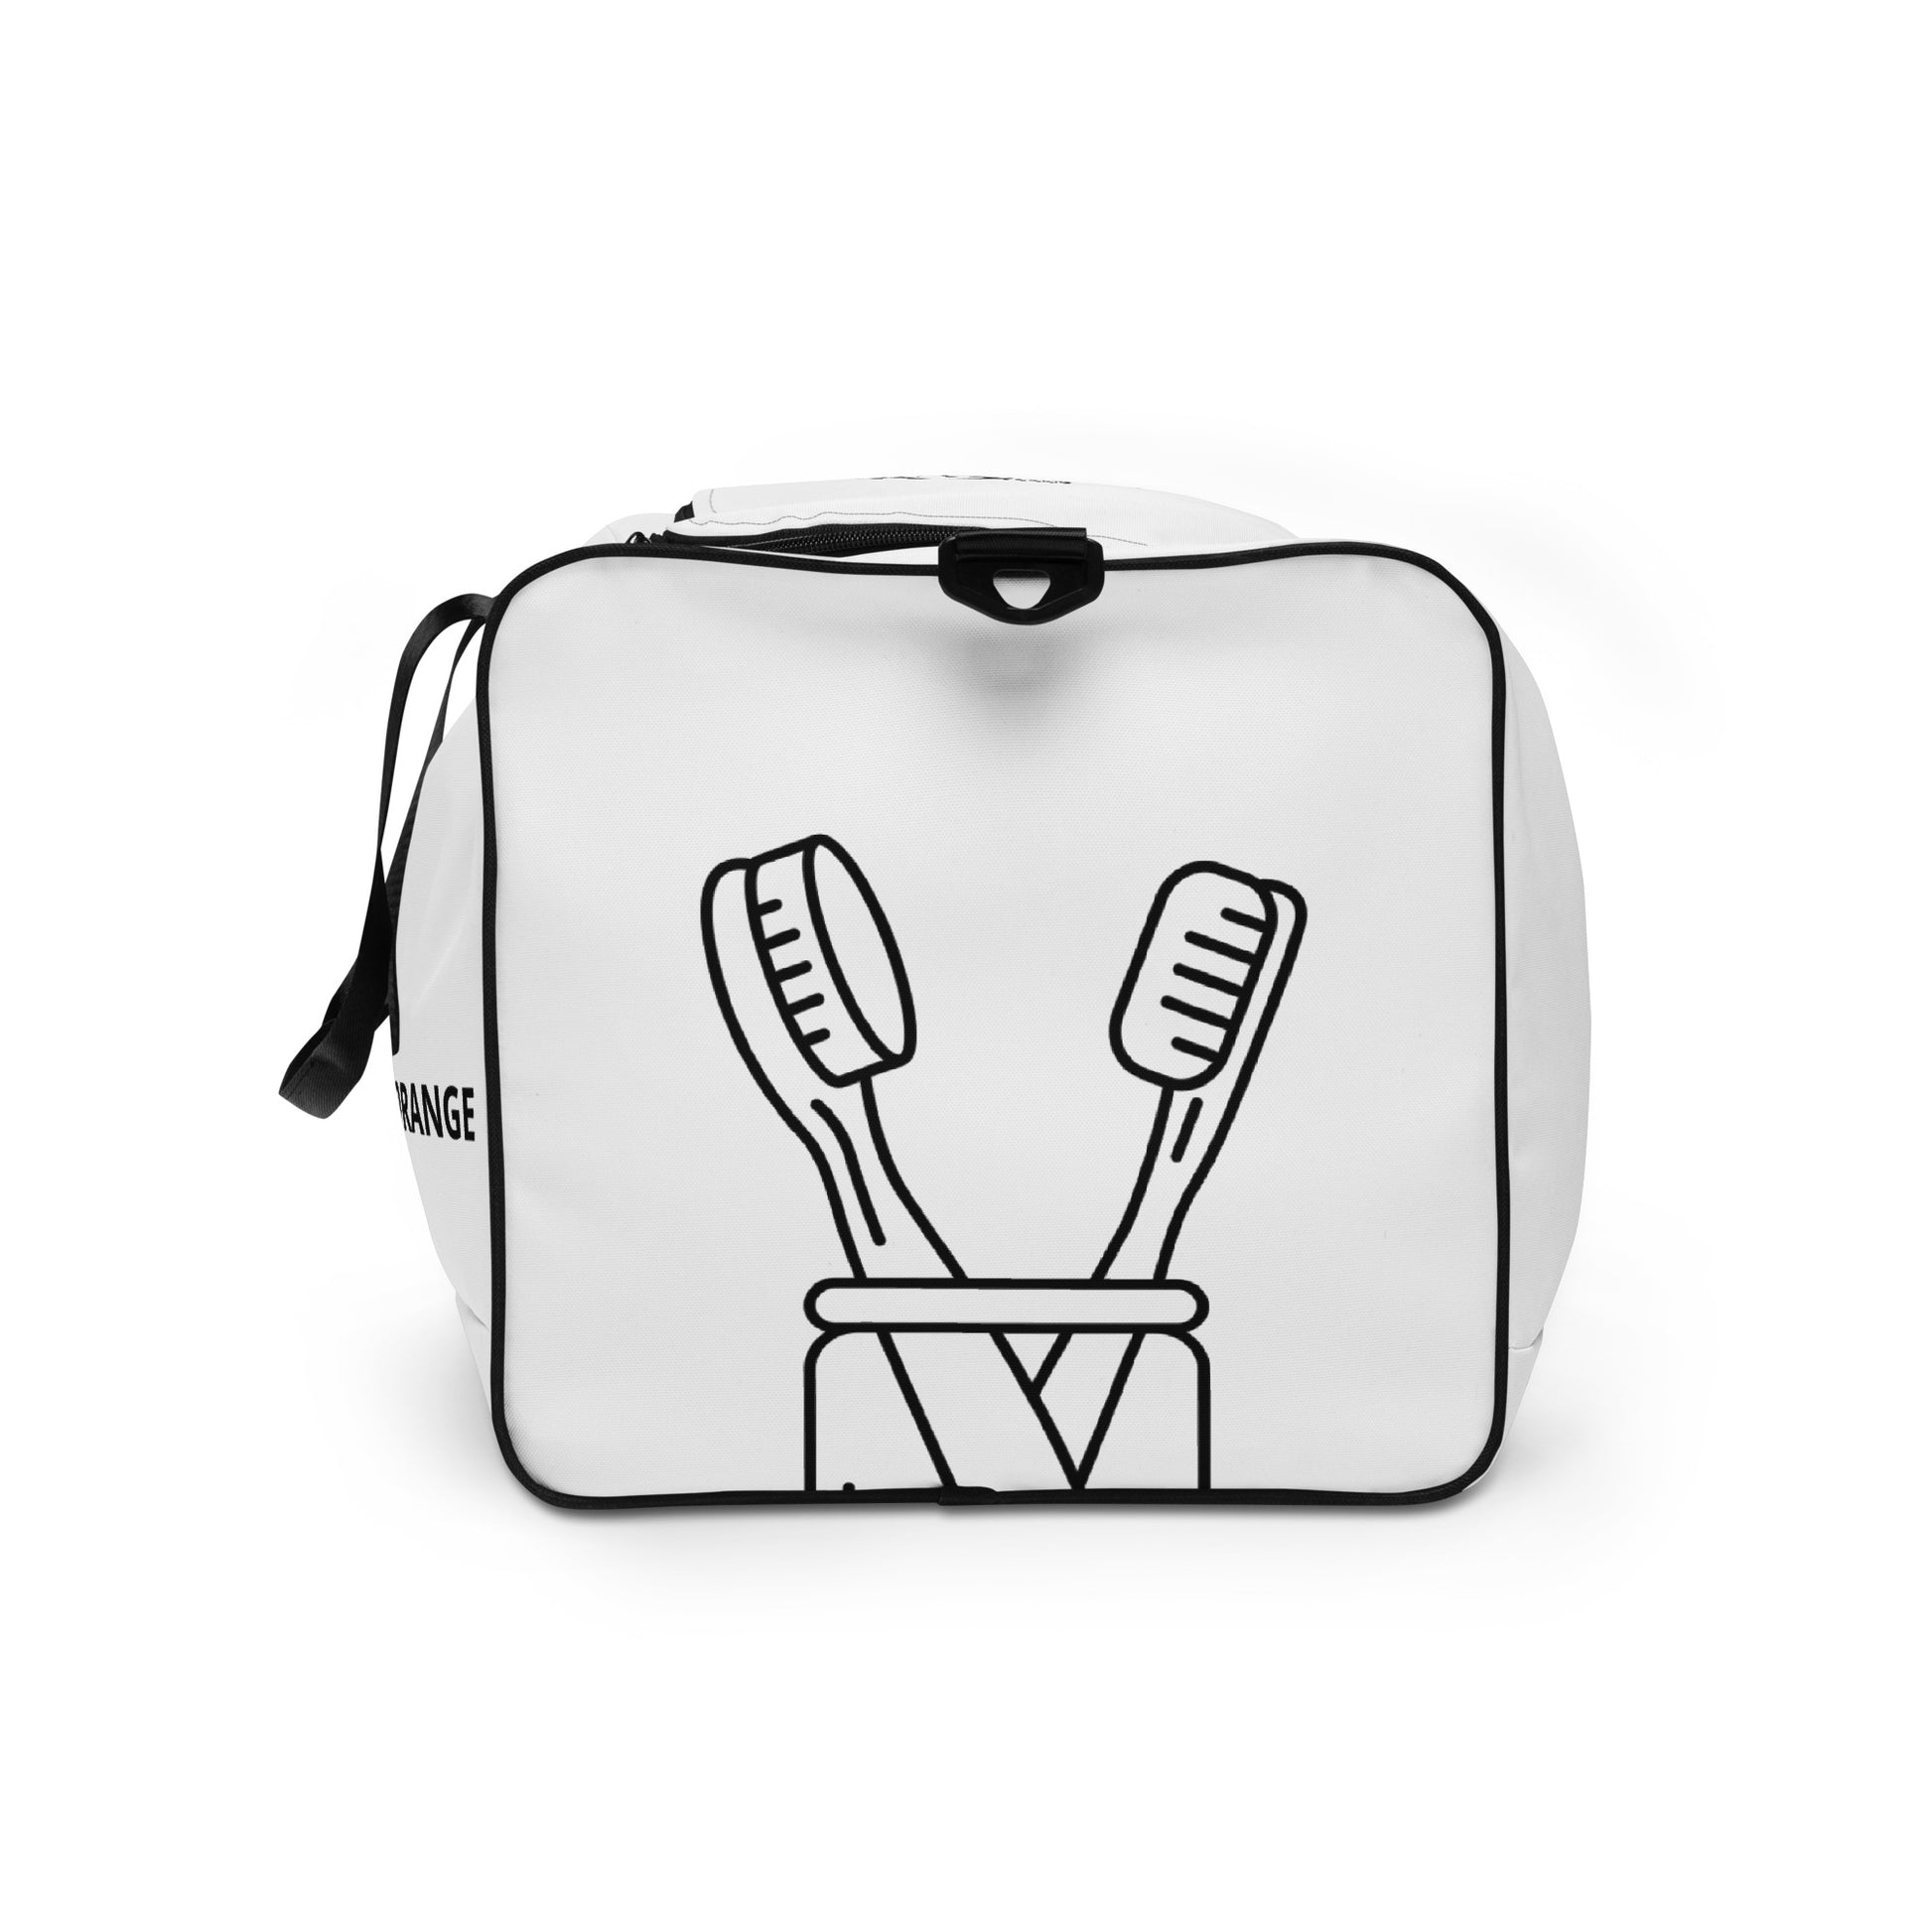 Toothbrush graphic on one side of a white and black travel bag